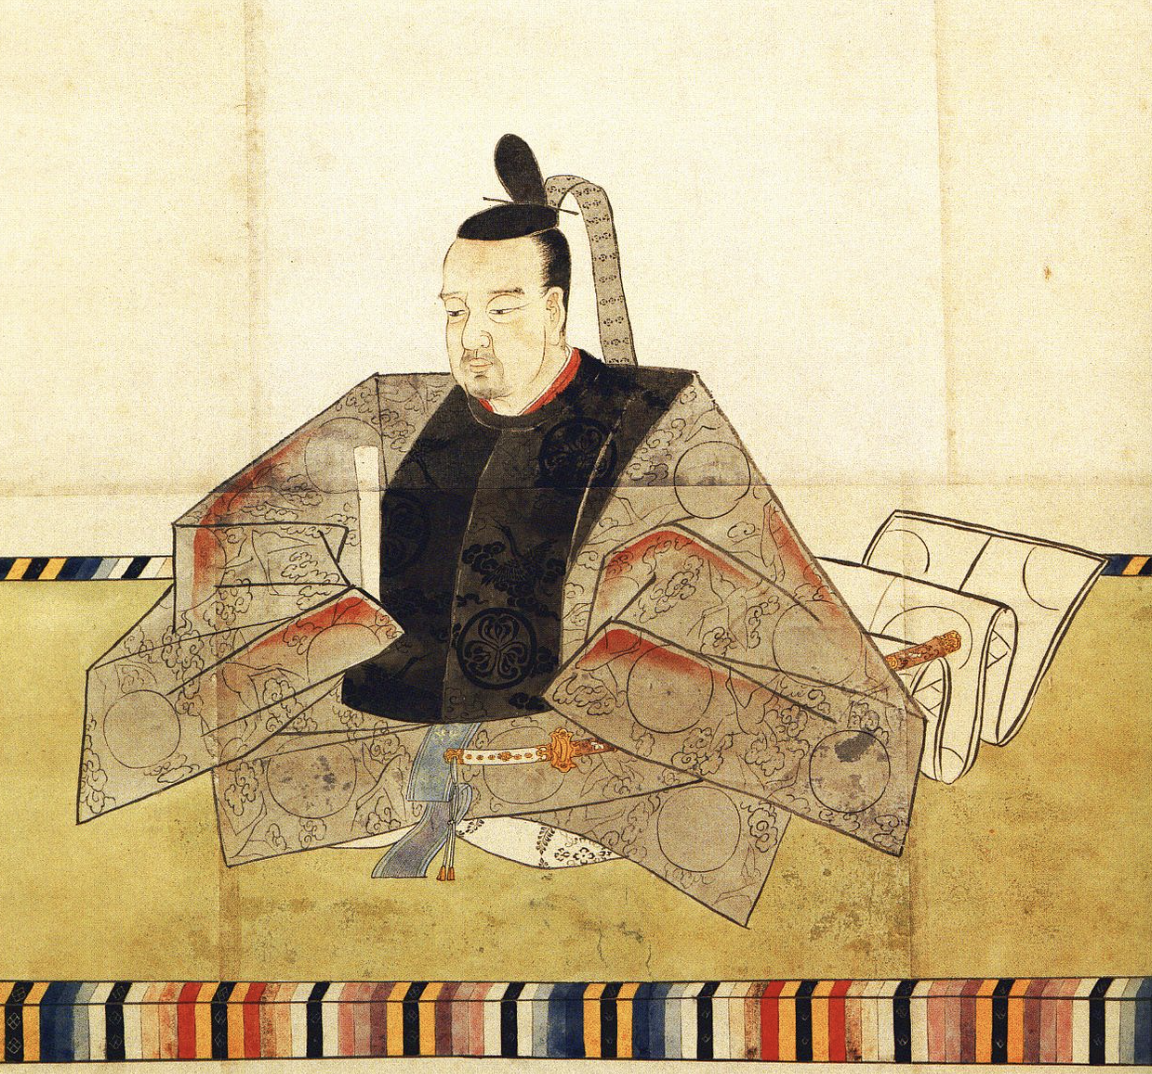 “In Japan, we have Tokugawa Ienari (1773-1841), the 11th and longest-reigning Tokugawa Shogun. In addition to his wife, he was said to have 39 official concubines, plus hundreds of other women in his harem. He fathered 26 sons and 27 daughters with 16 of his concubines. Was said to have syphilis, but nonetheless managed to live to the ripe old age of 68.” 